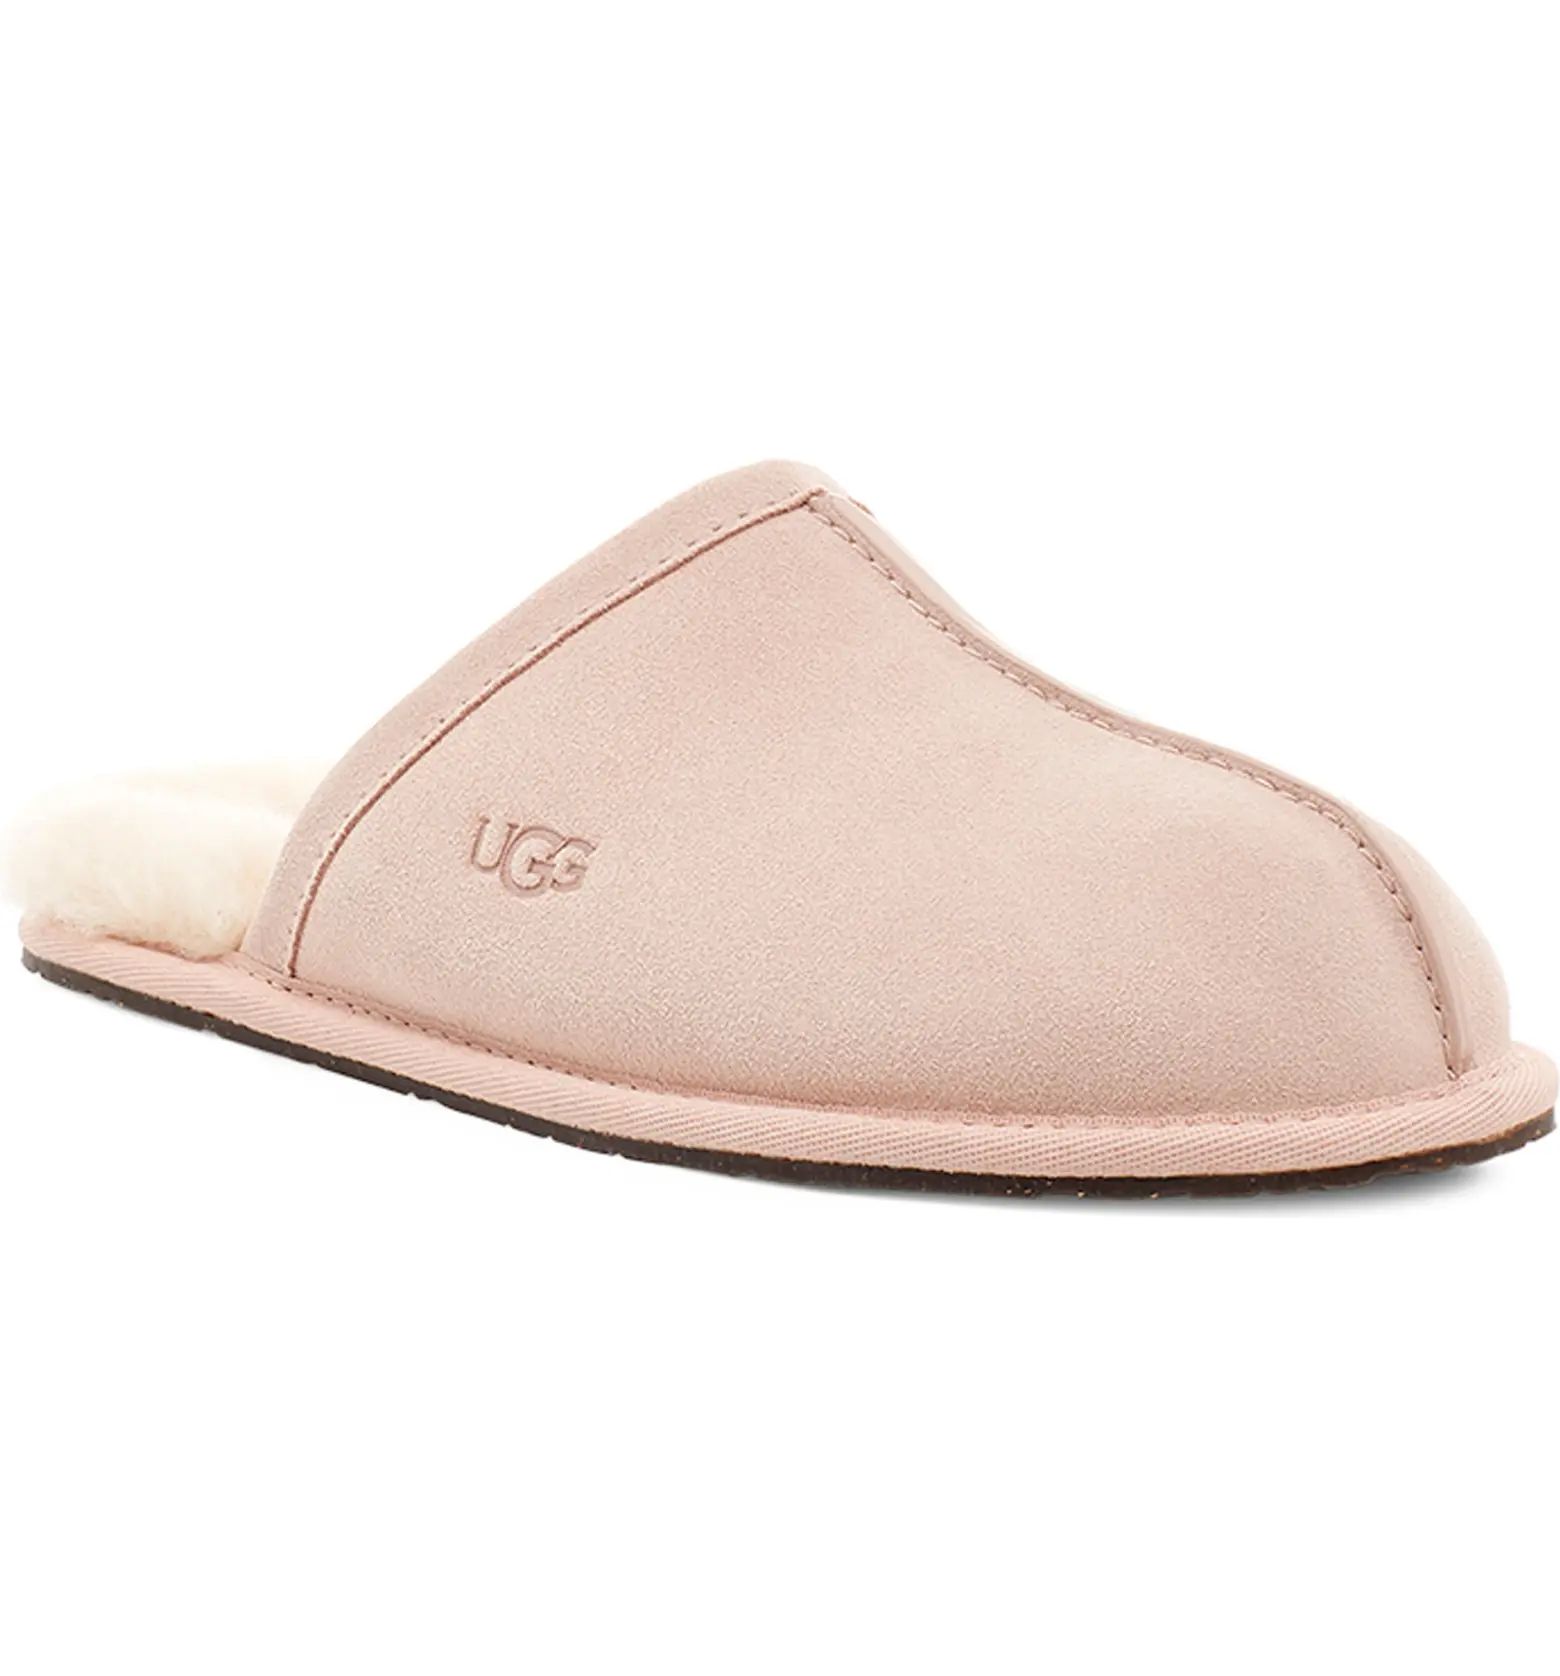 Pearle Faux Fur Lined Scuff Slipper | Nordstrom Rack